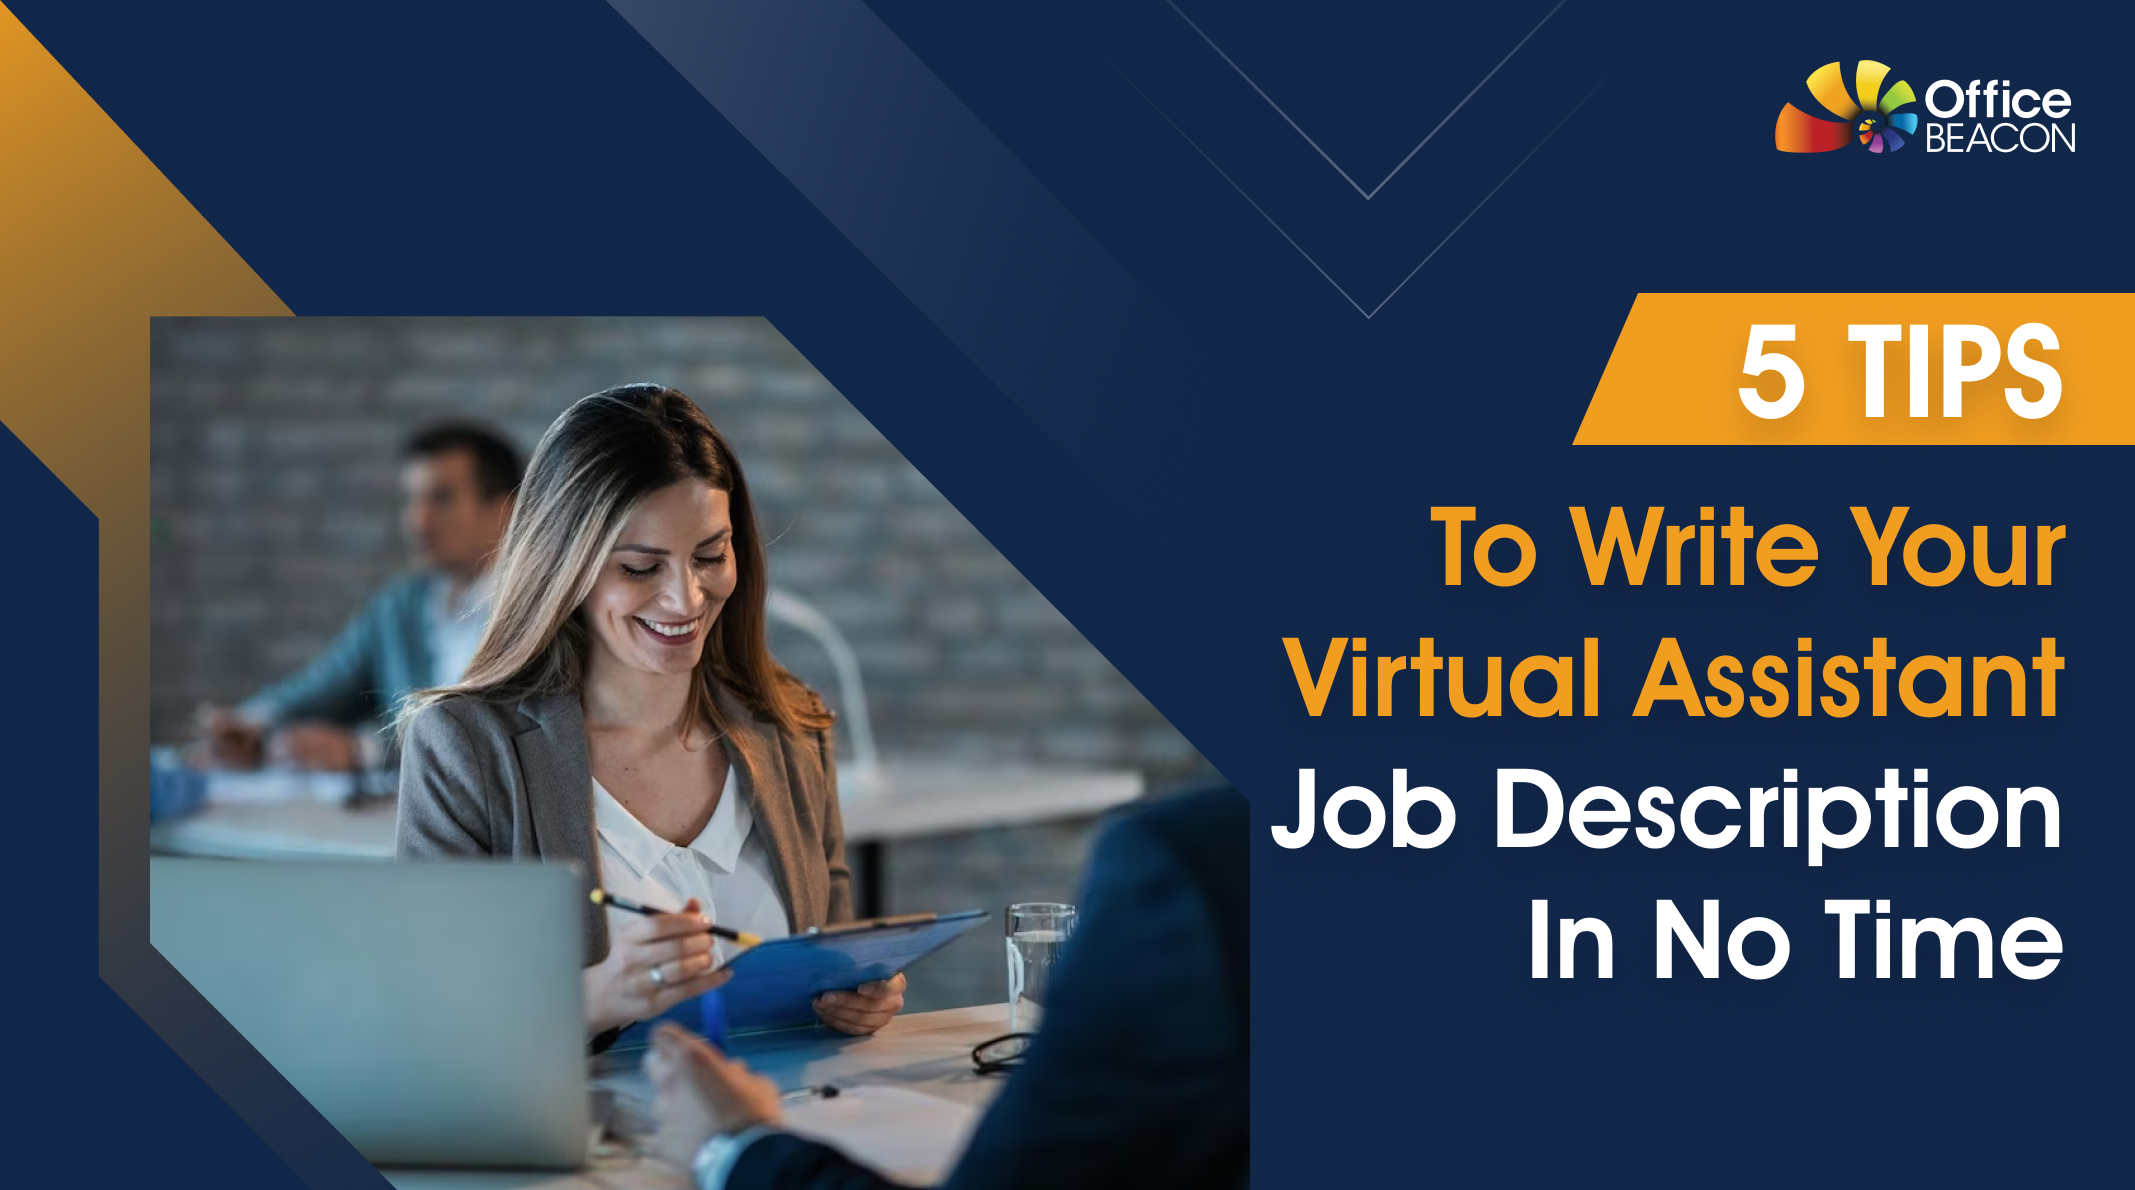 5 Tips To Write Your Virtual Assistant Job Description In No Time